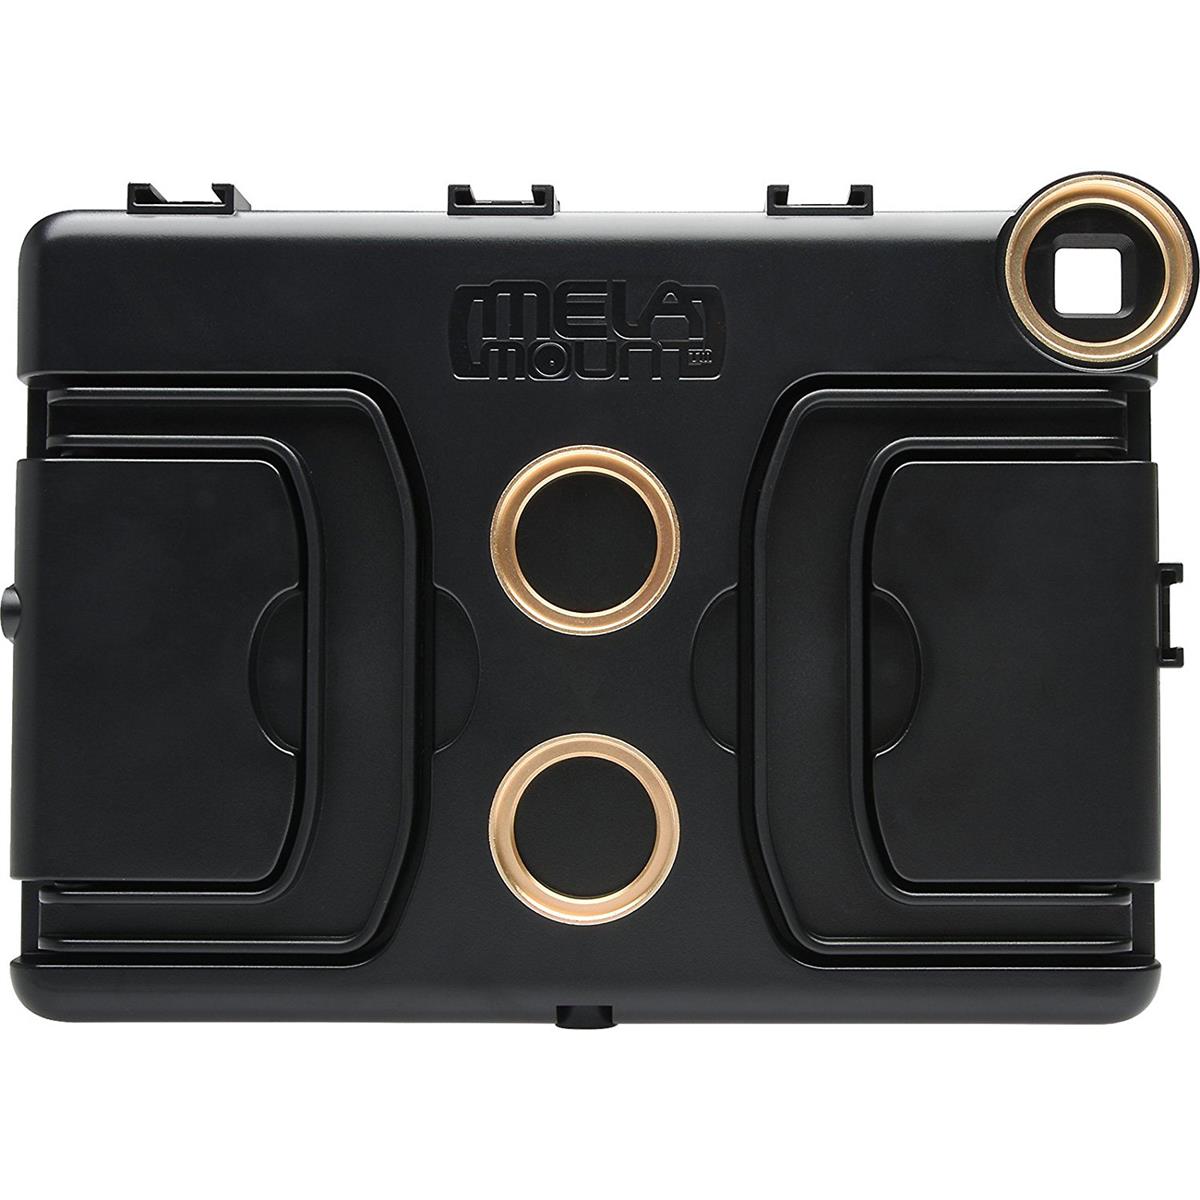 Image of VidPro MelaMount Professional Multimedia Rig for iPad Air 2